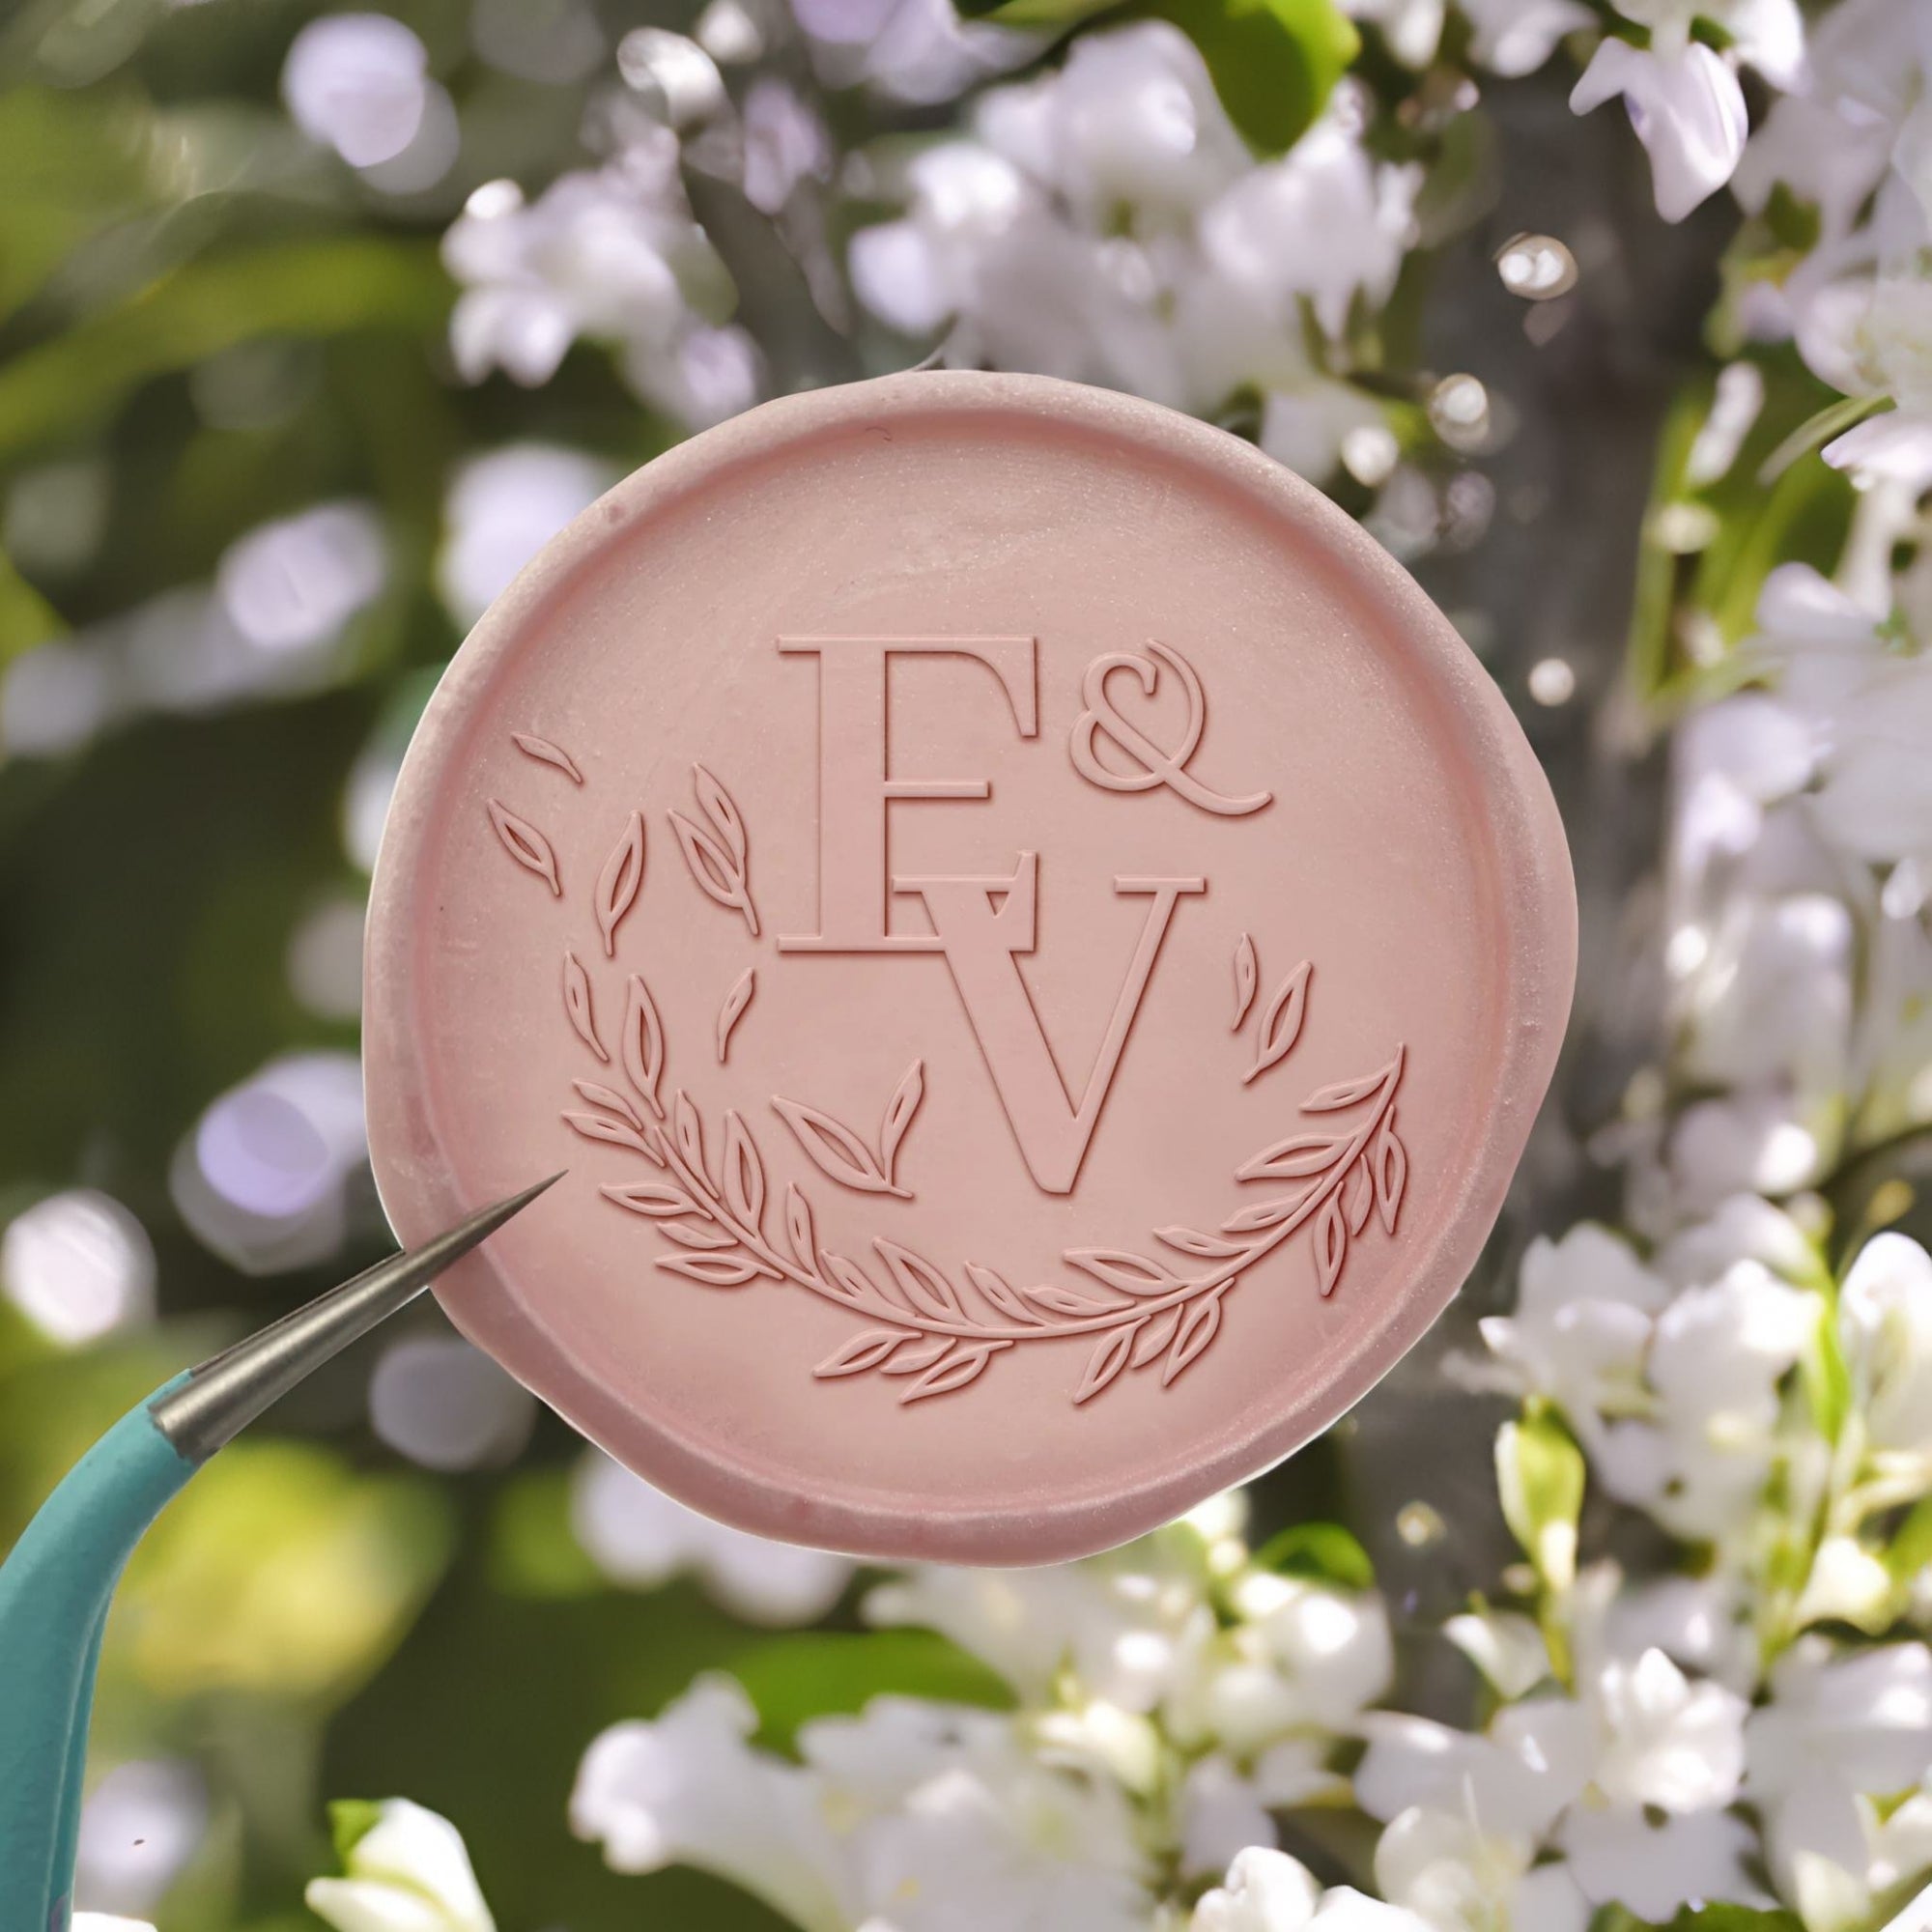 Olive Branch Double Initials Wedding Custom Self-Adhesive Wax Seal Stickers